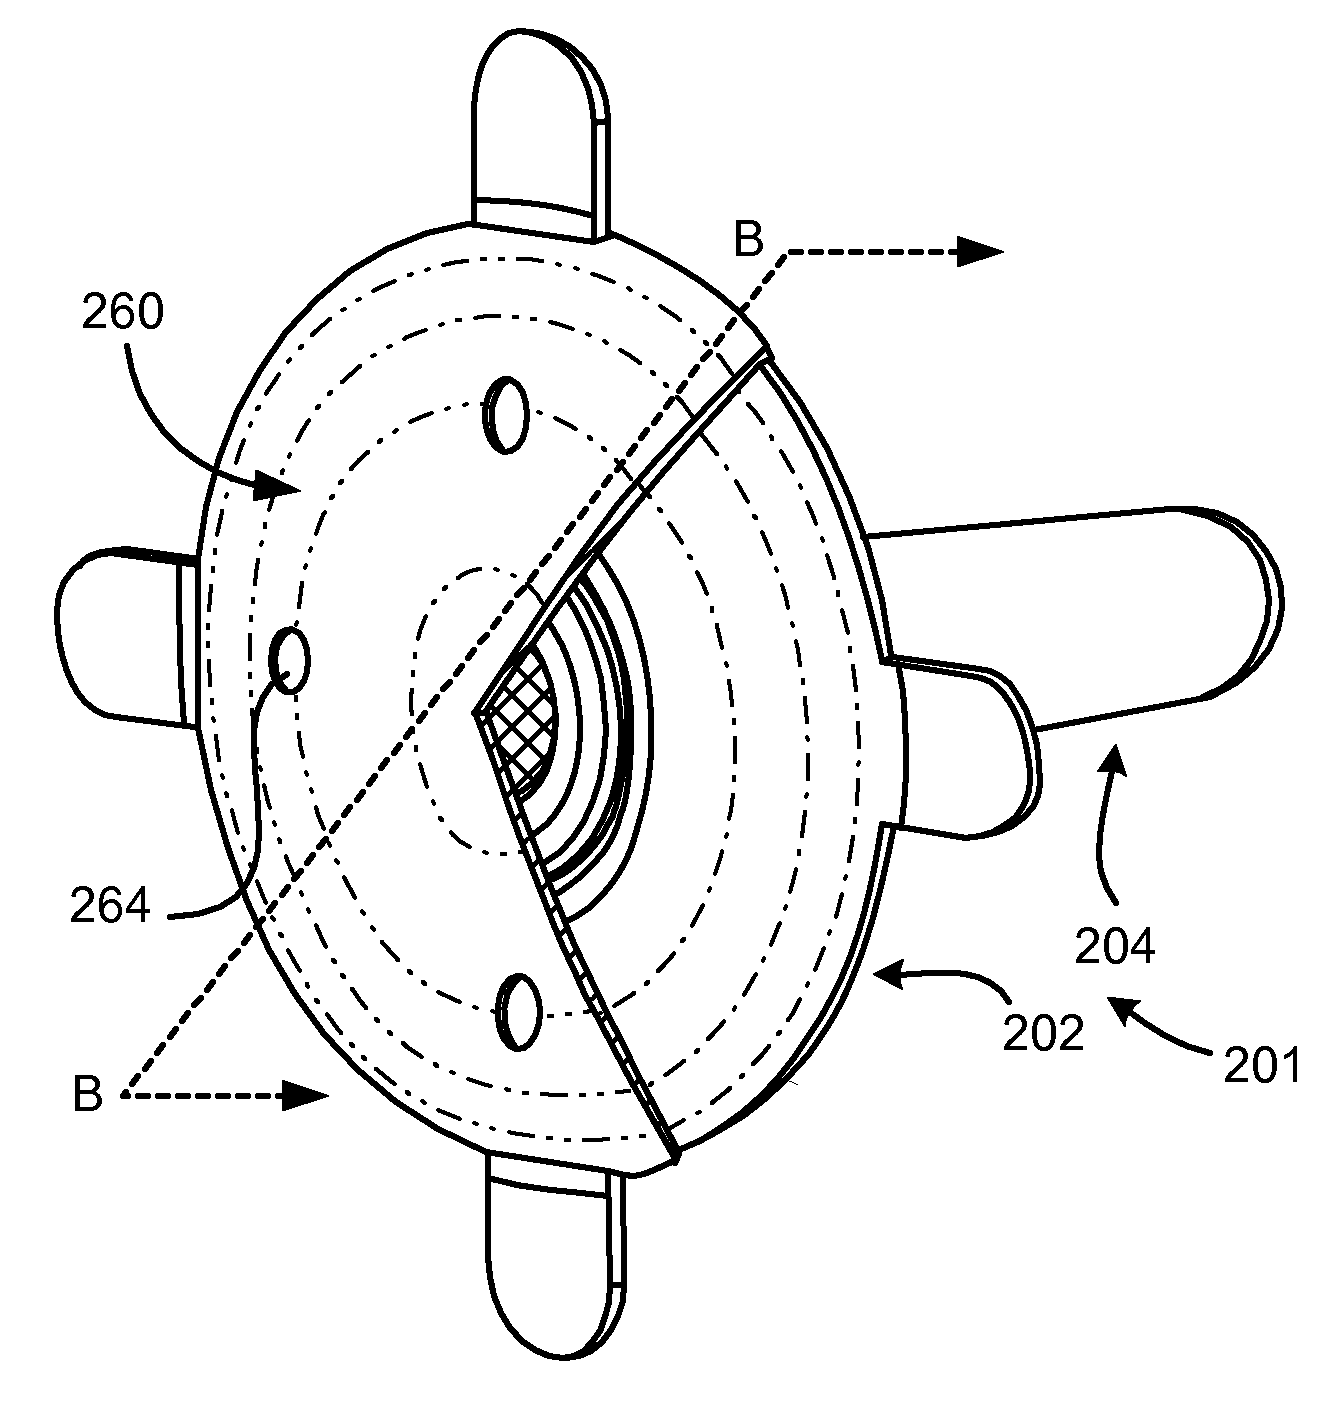 Pneumostoma management system having a cosmetic and/or protective cover